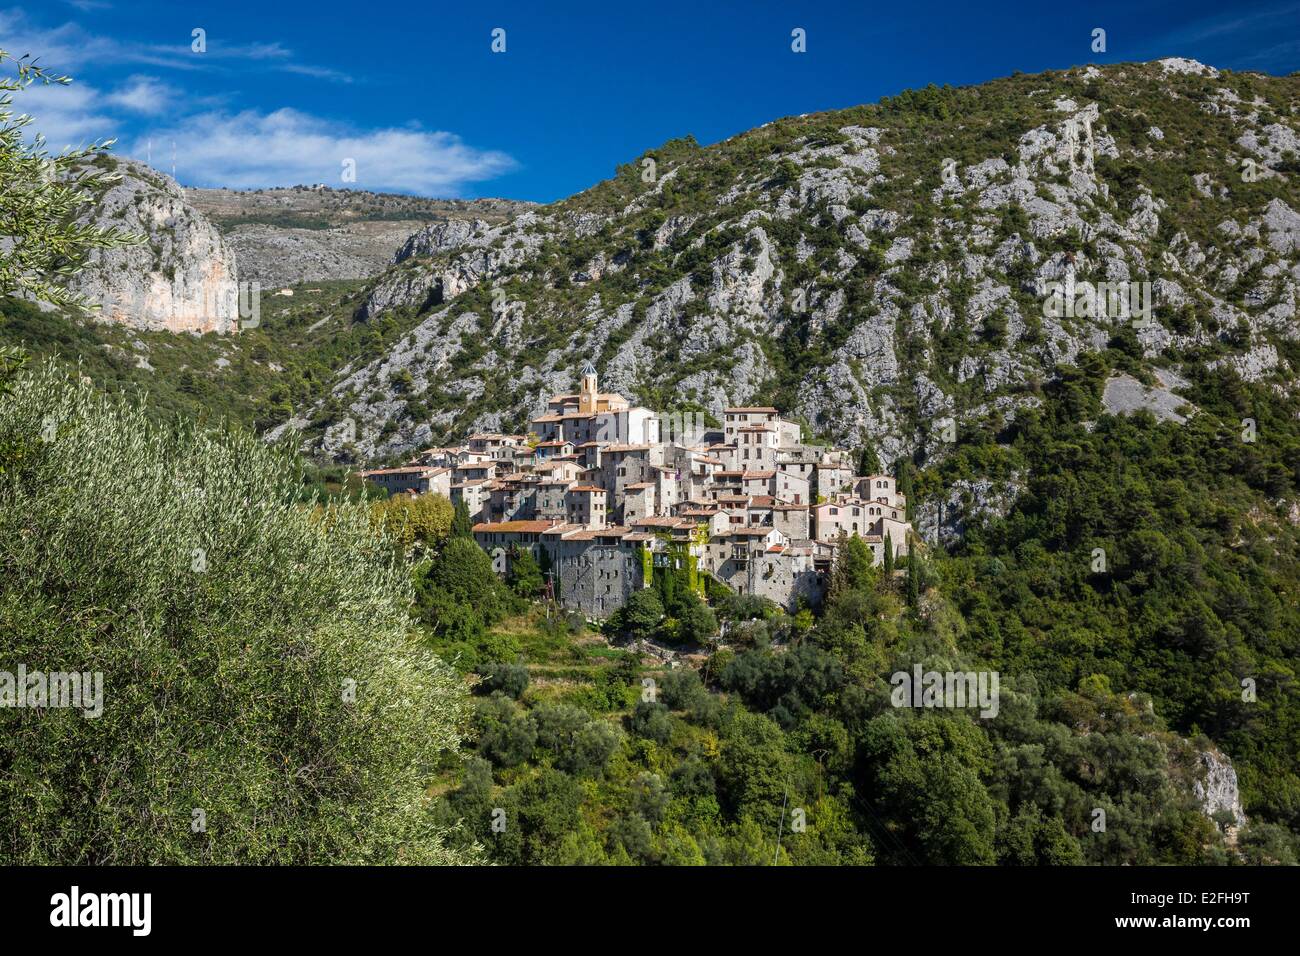 France, Alpes Maritimes, perched village of Peillon in Nice Hinterland Stock Photo